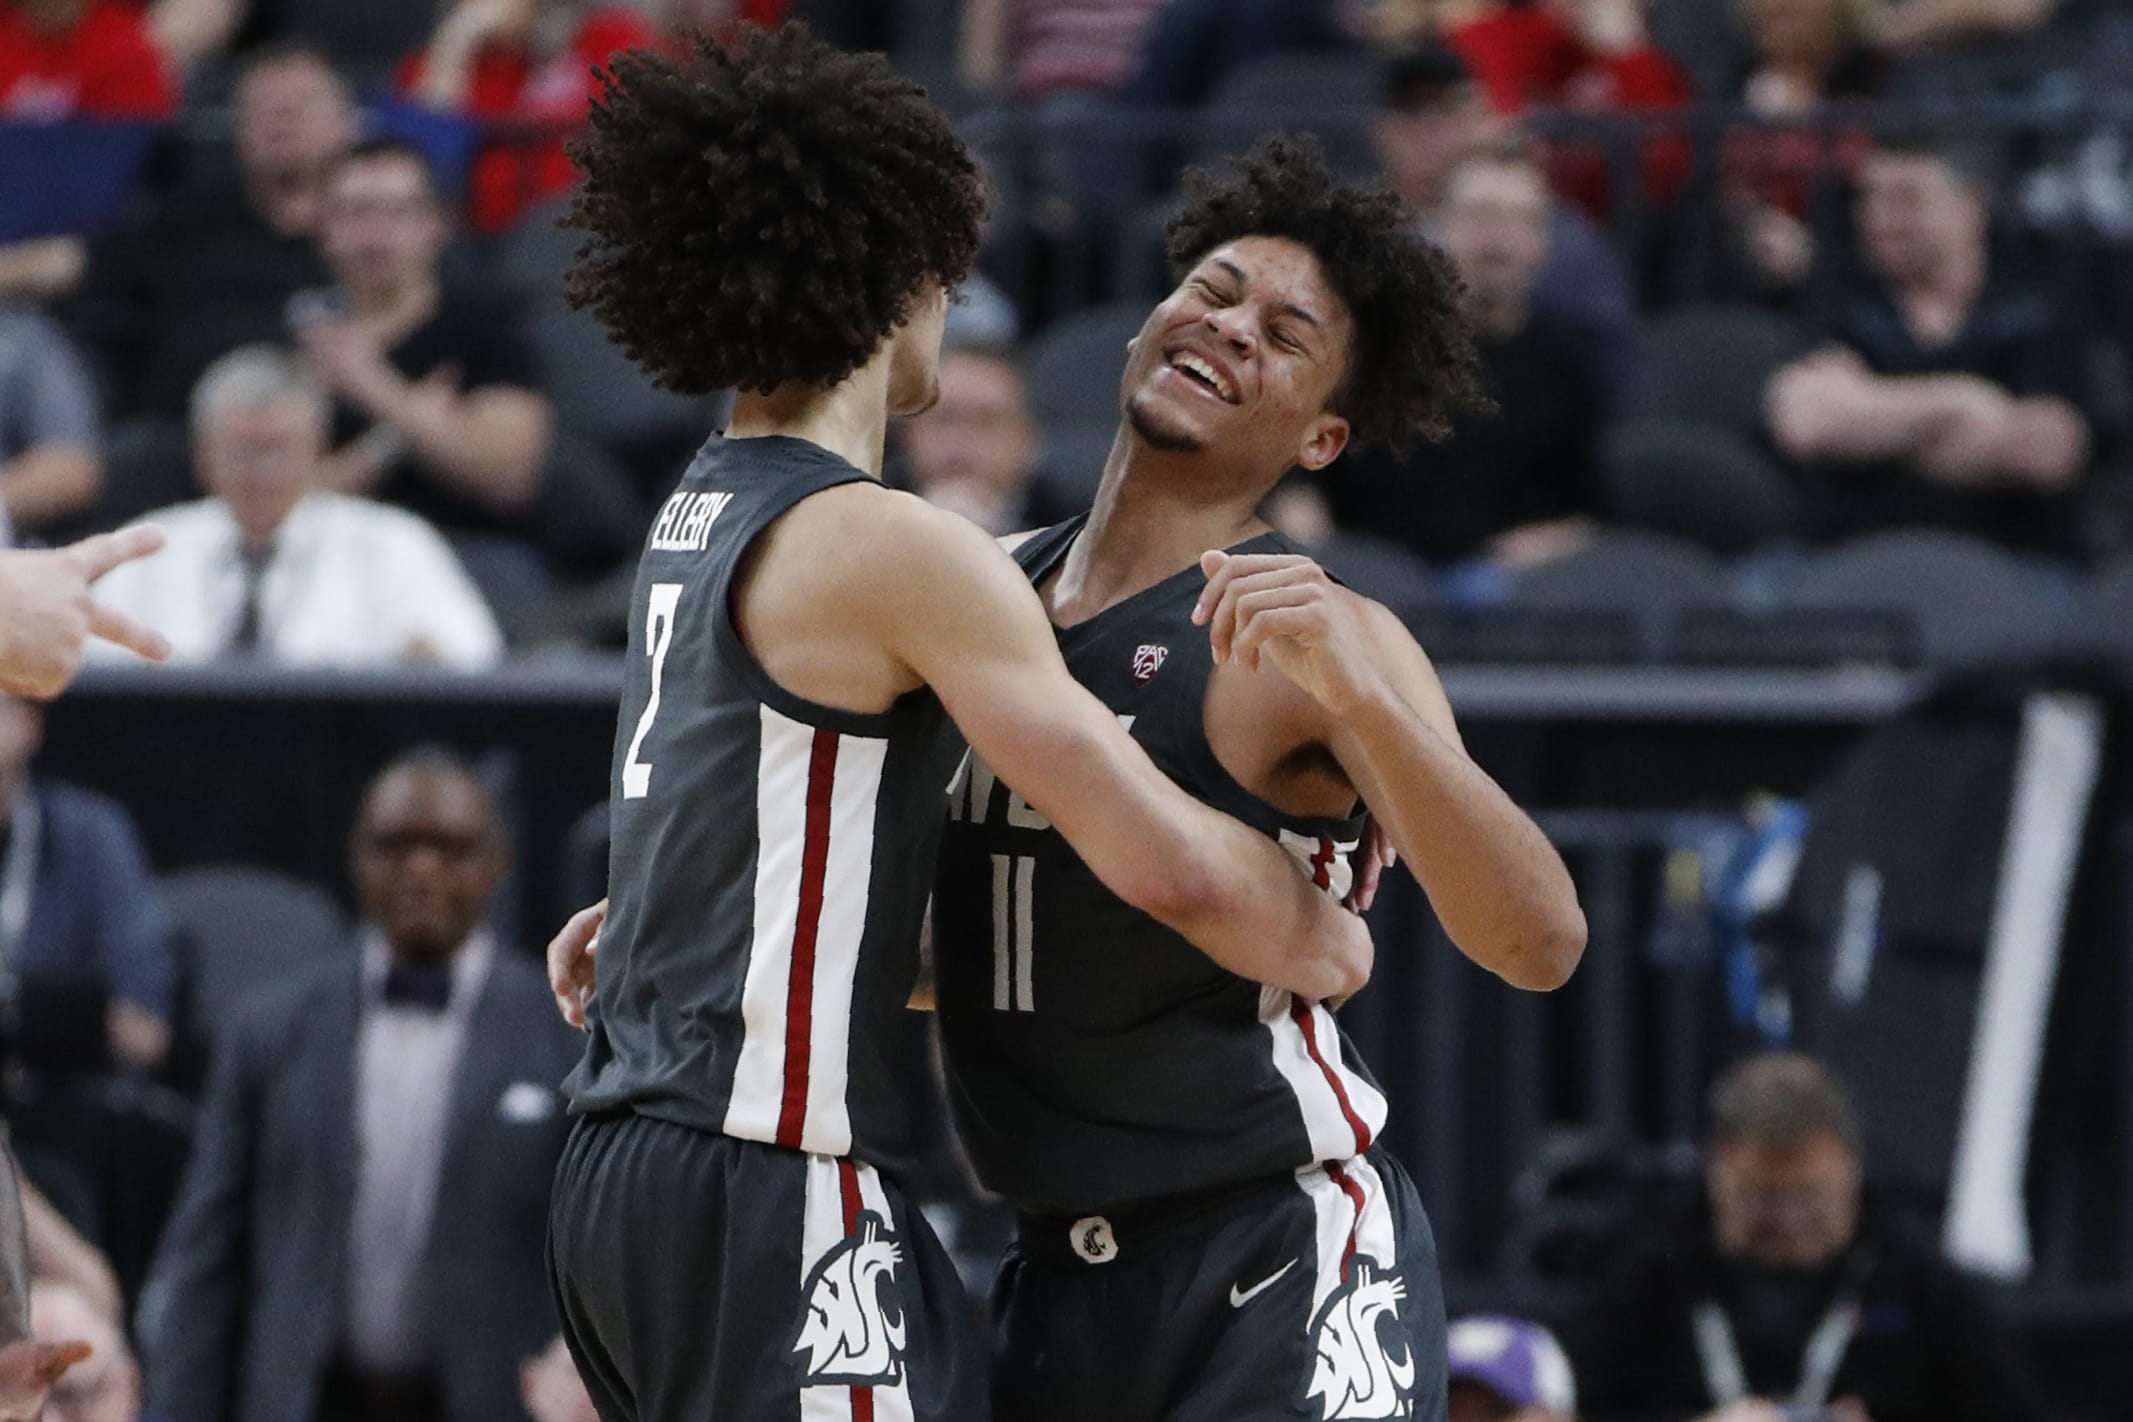 Washington State's CJ Elleby, left, and DJ Rodman celebrate after a play against Colorado during the second half of an NCAA college basketball game in the first round of the Pac-12 men's tournament Wednesday, March 11, 2020, in Las Vegas.